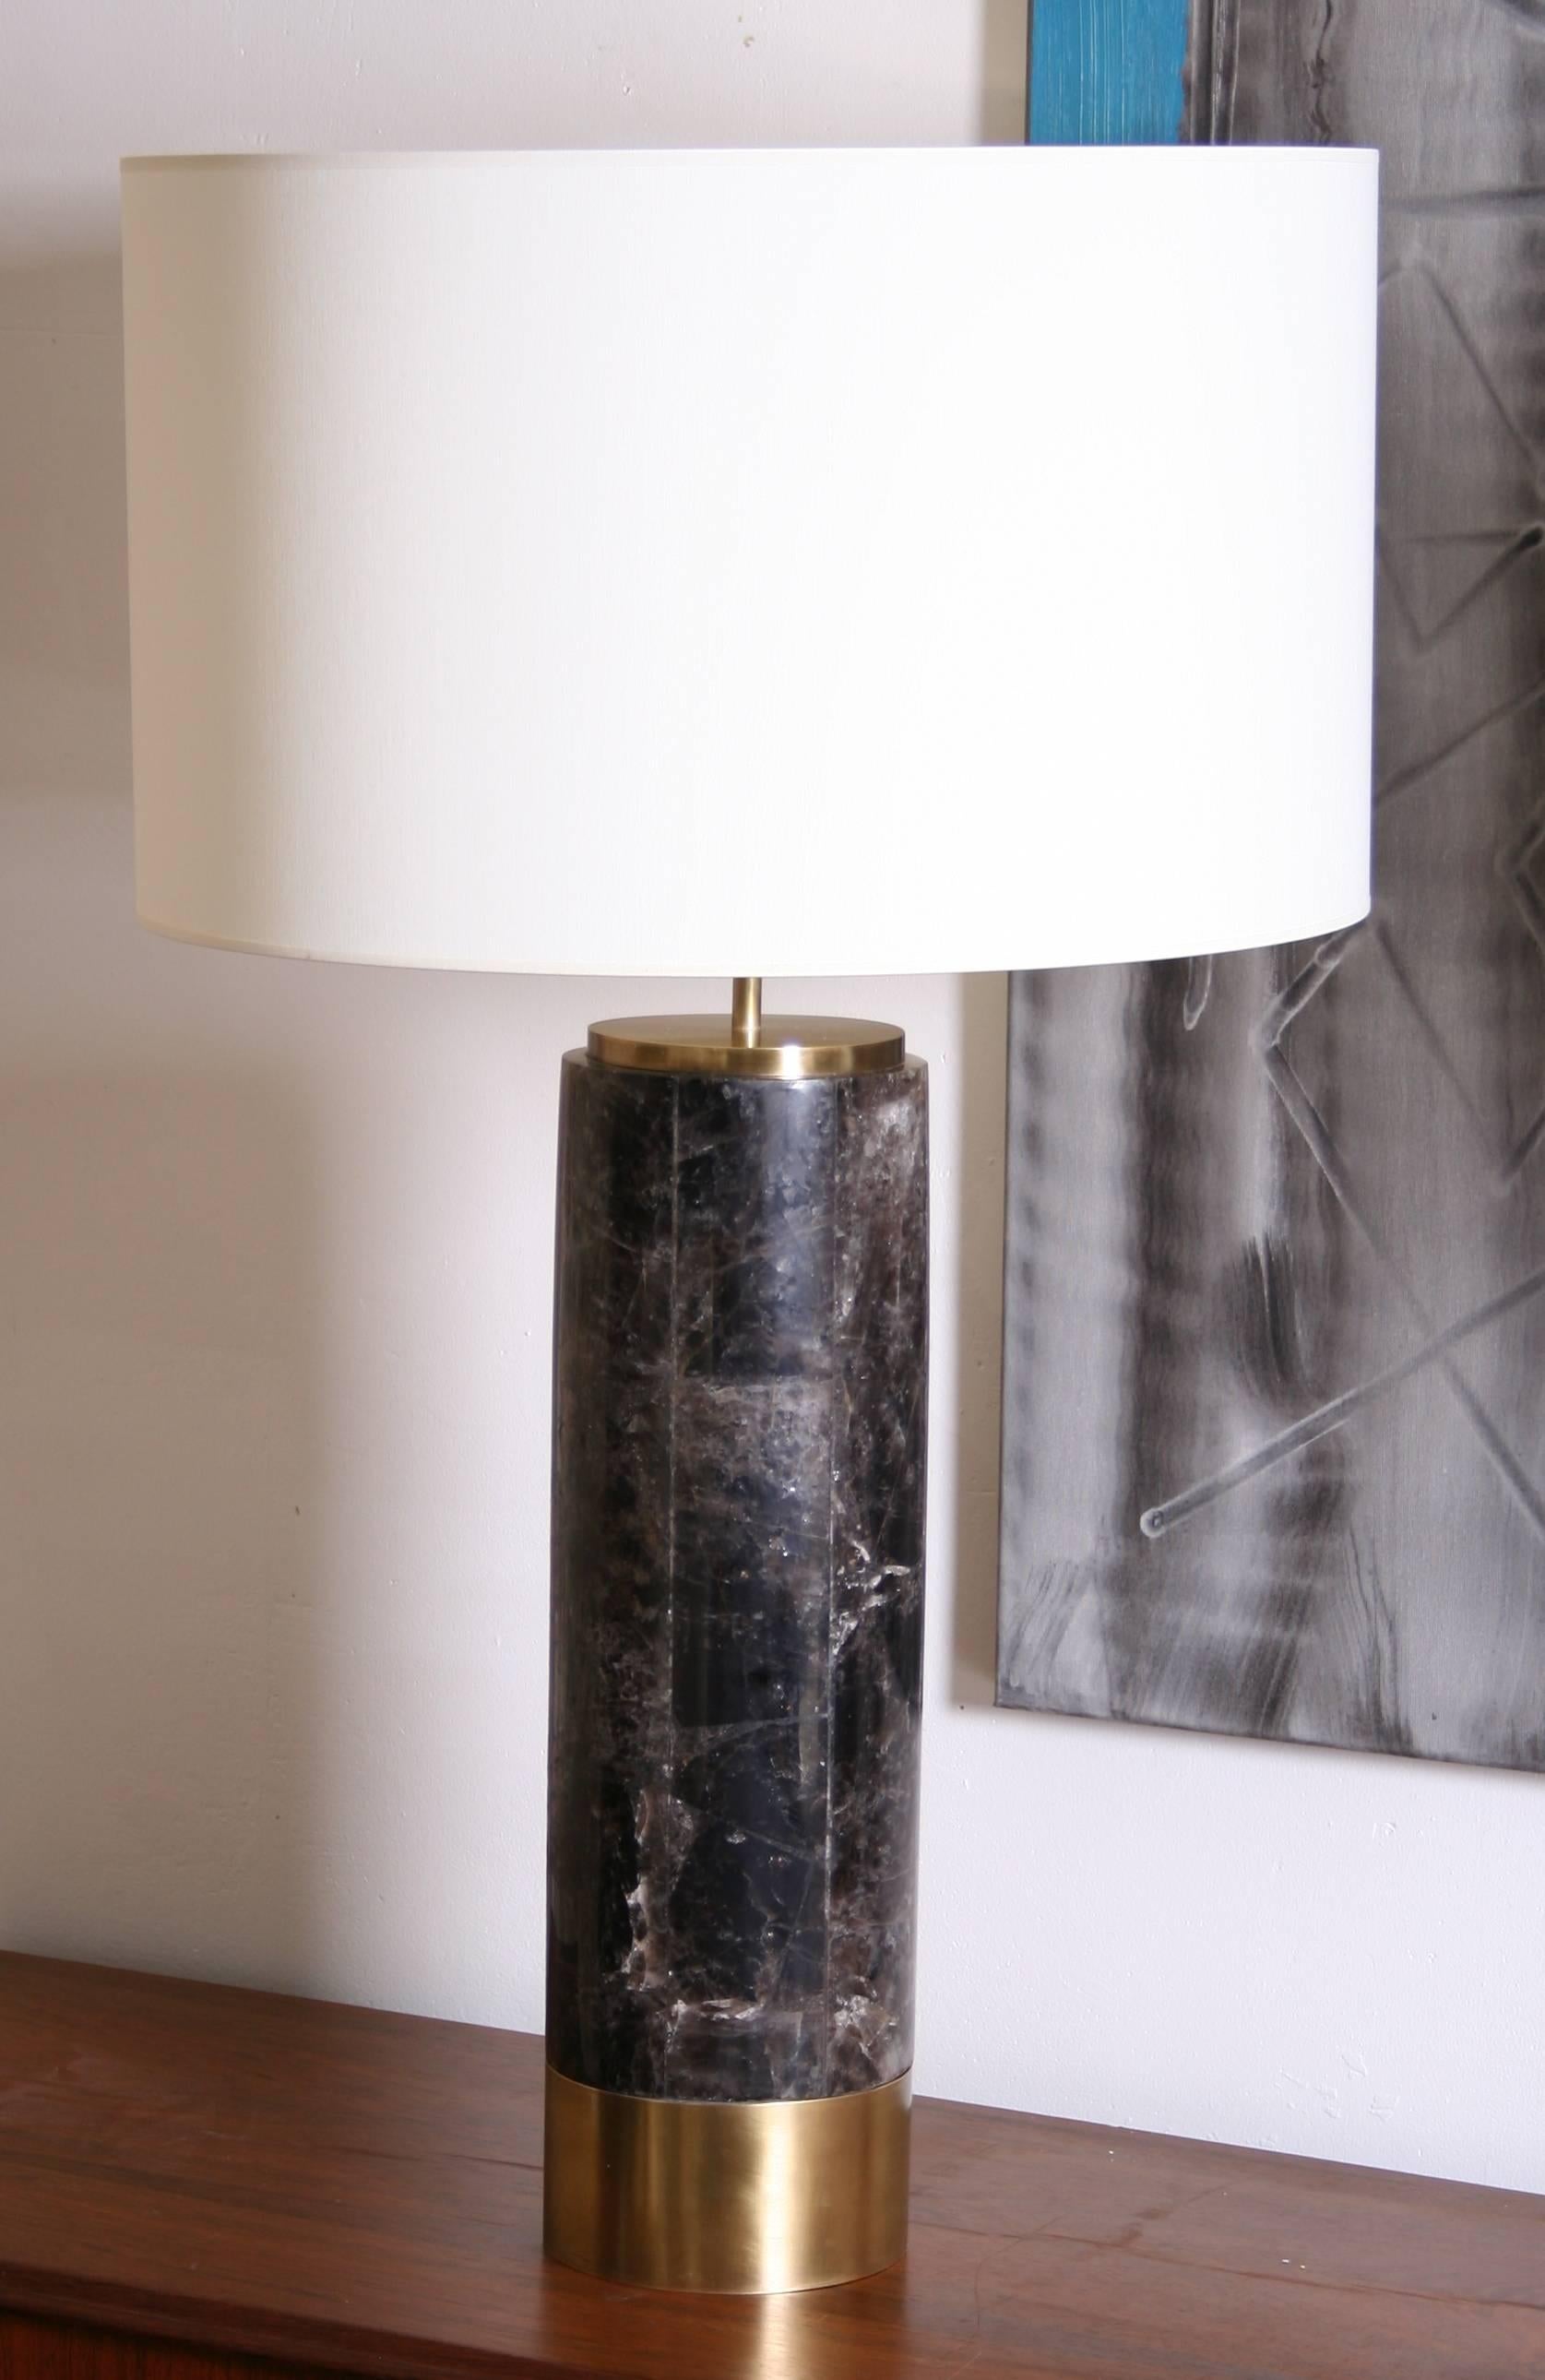 Hand-Crafted Pair of Table Lamps in Smokey Quartz and Brass, Model Kristalia by Arriau For Sale